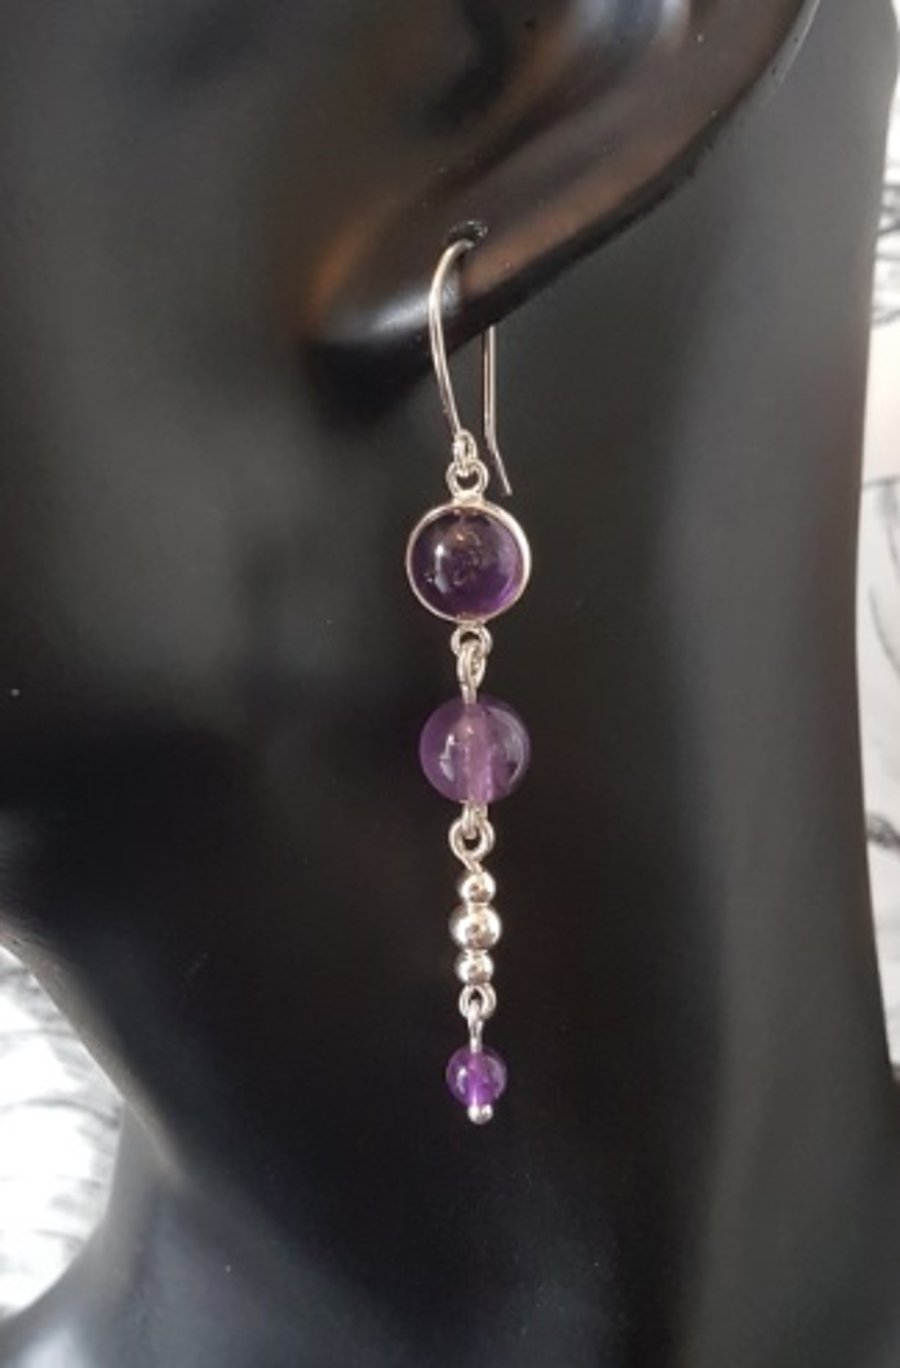 Gorgeous Amethyst and Sterling Silver dangly earrings.